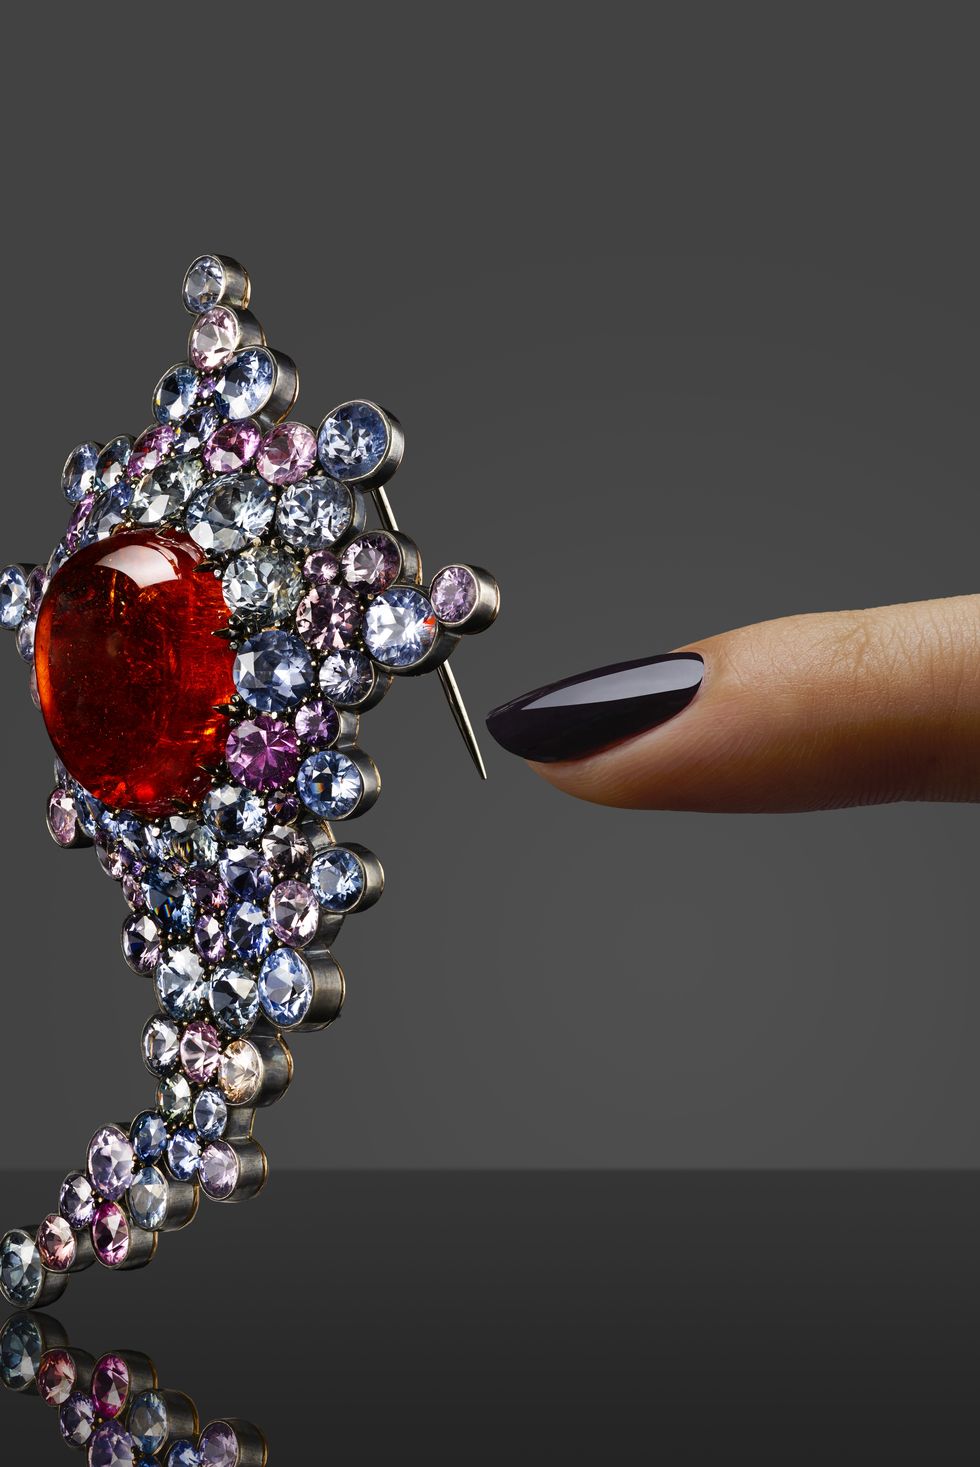 Meet the Most Exclusive Jewelers From Around the Globe